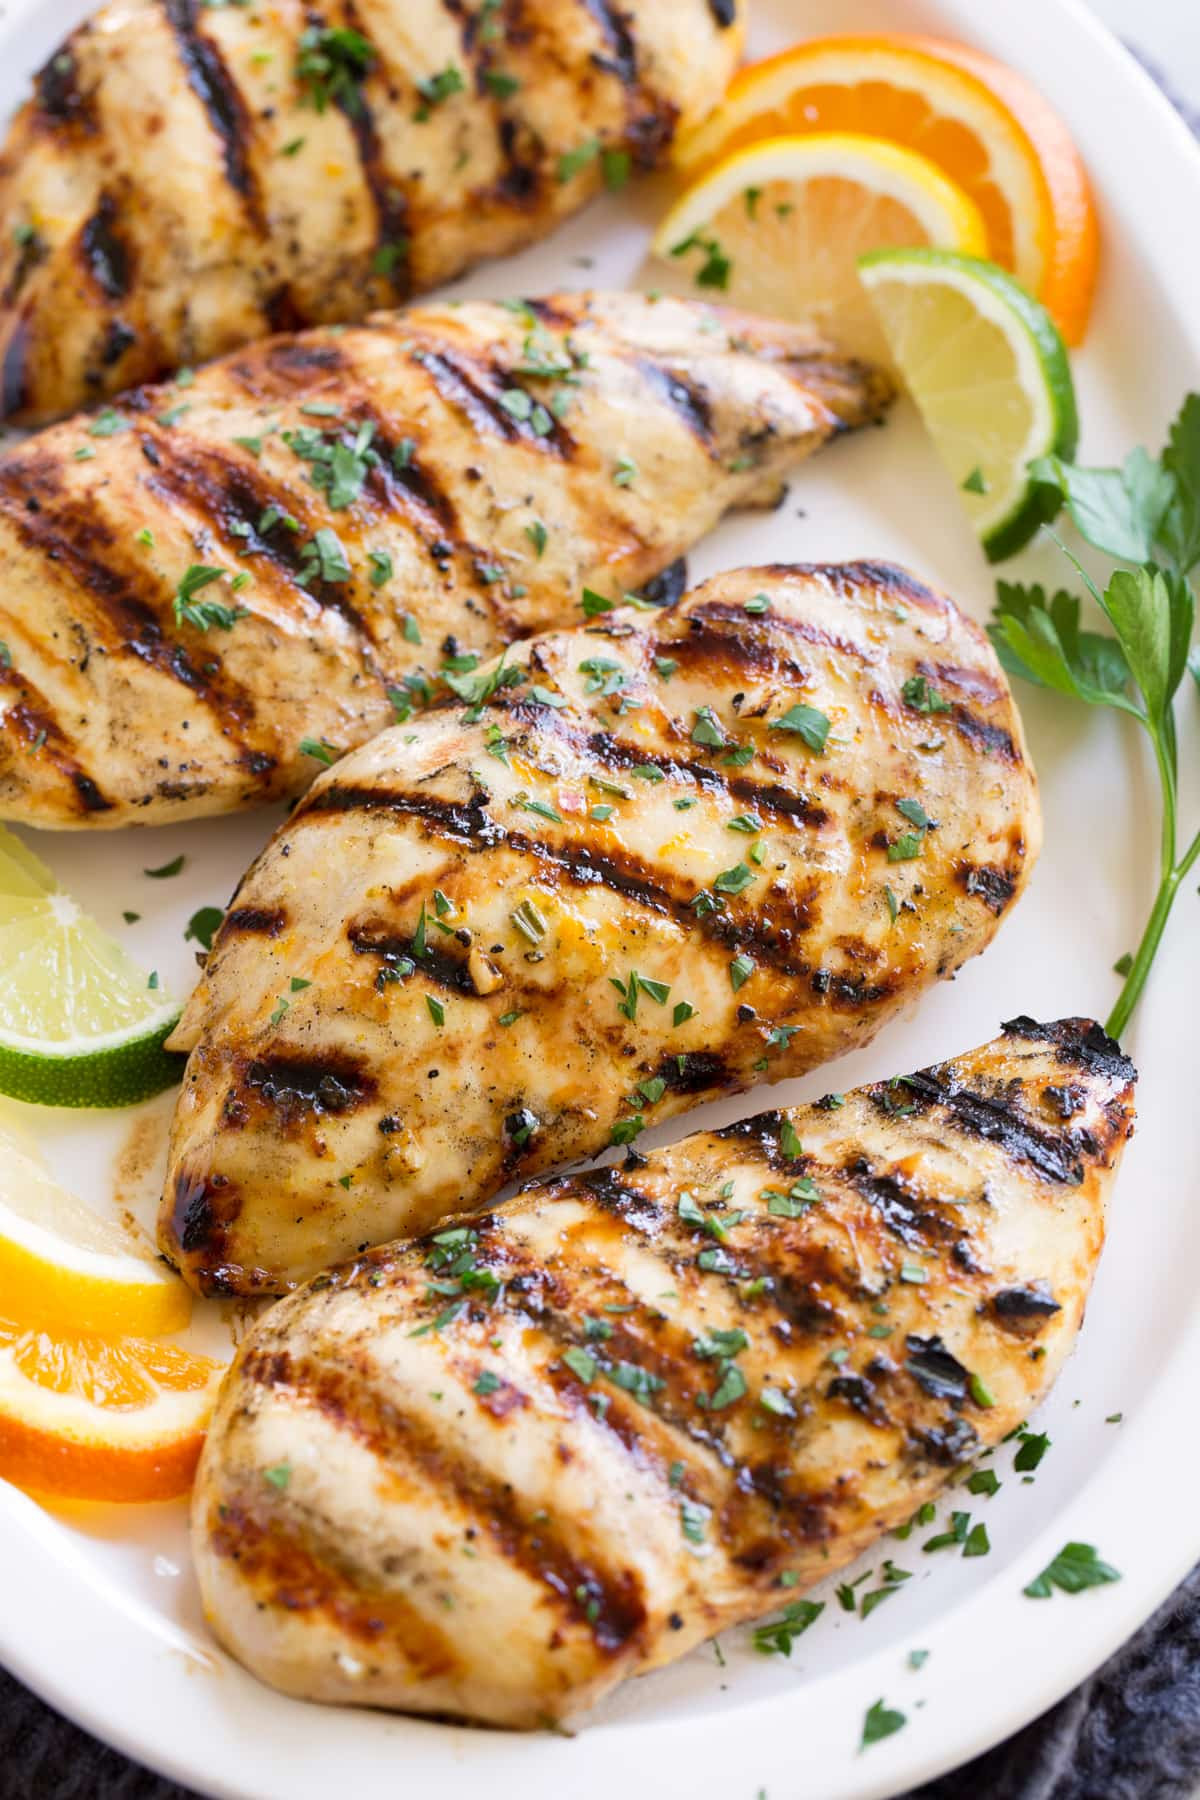 Marinades For Chicken Awesome Chicken Marinade Recipe Triple Citrus Cooking Classy Of Marinades For Chicken 